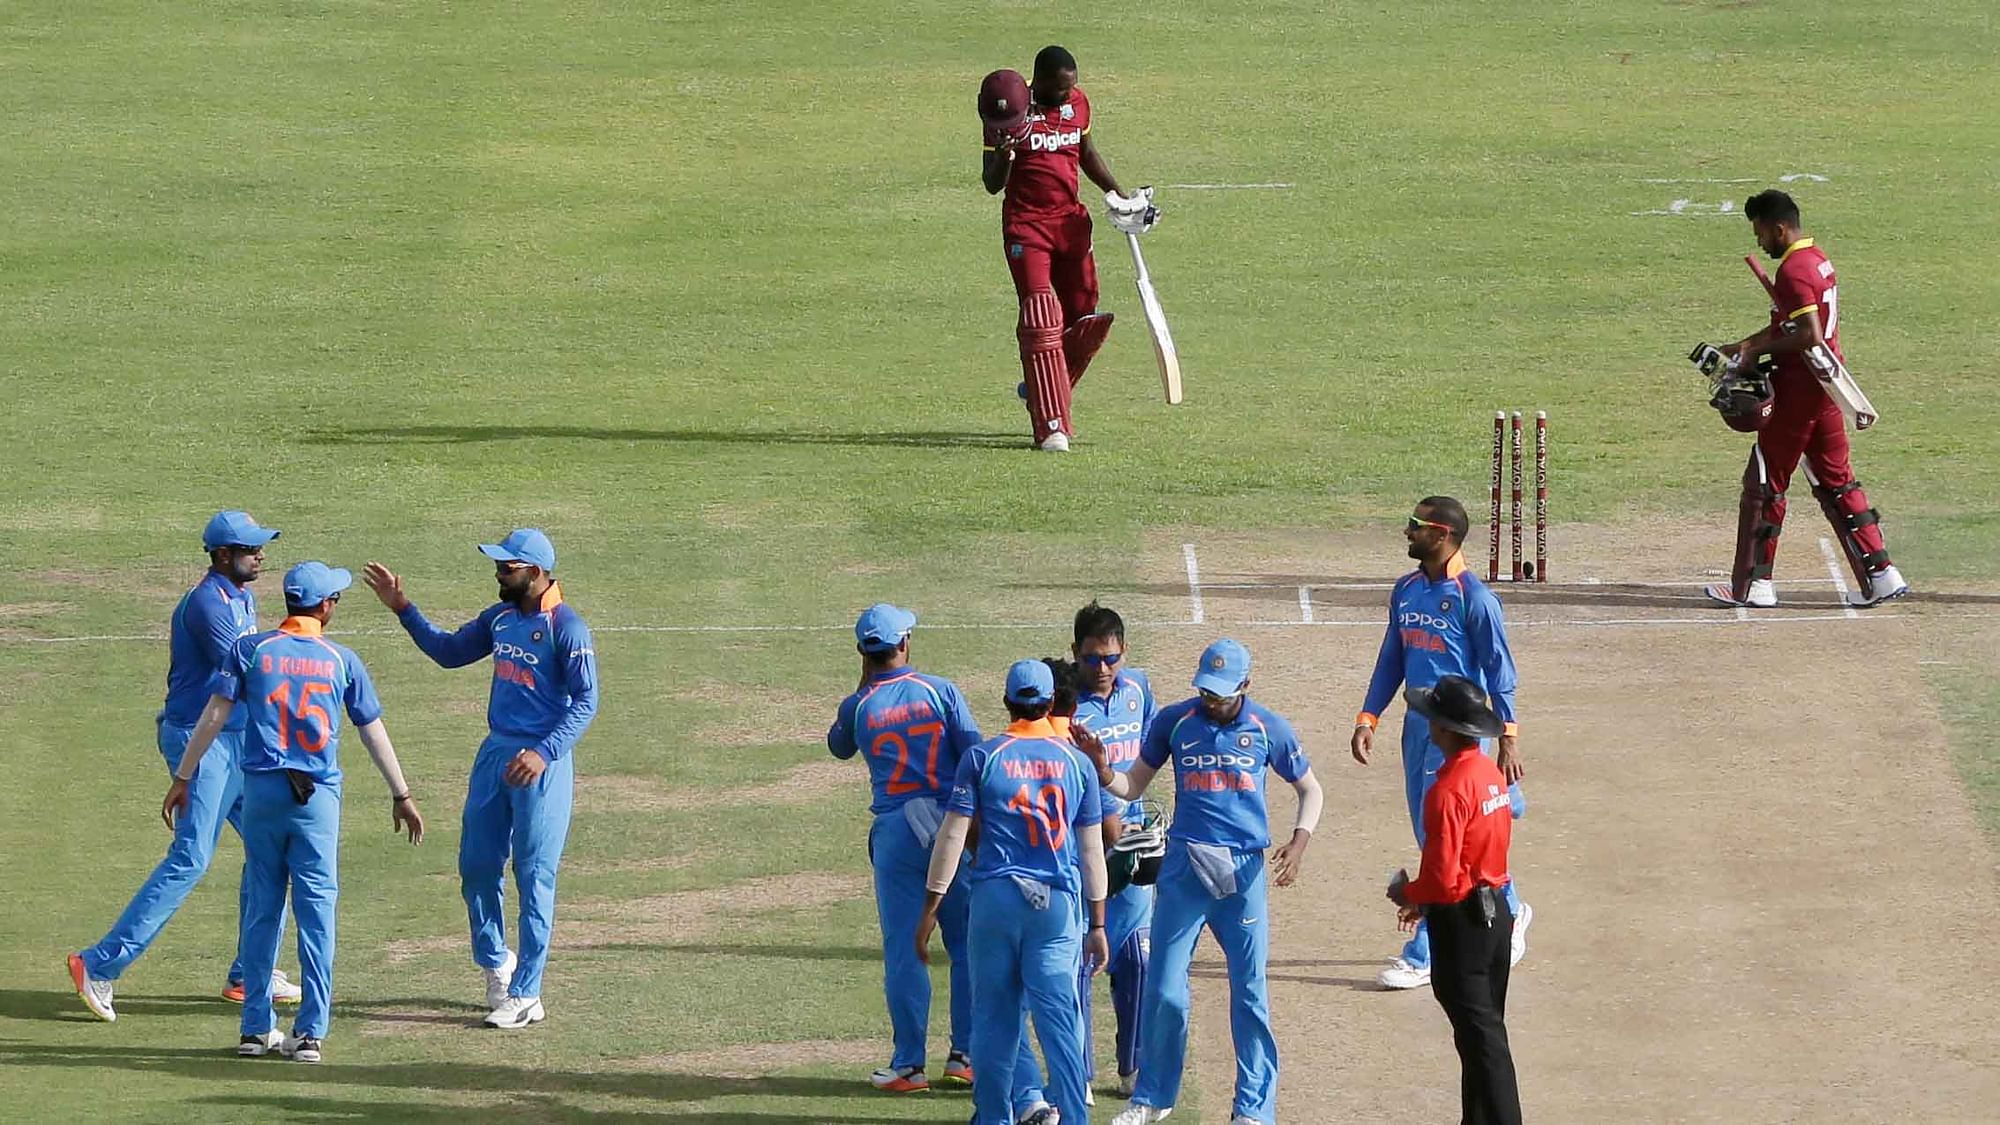 India beat West Indies by 93 runs in the third ODI.